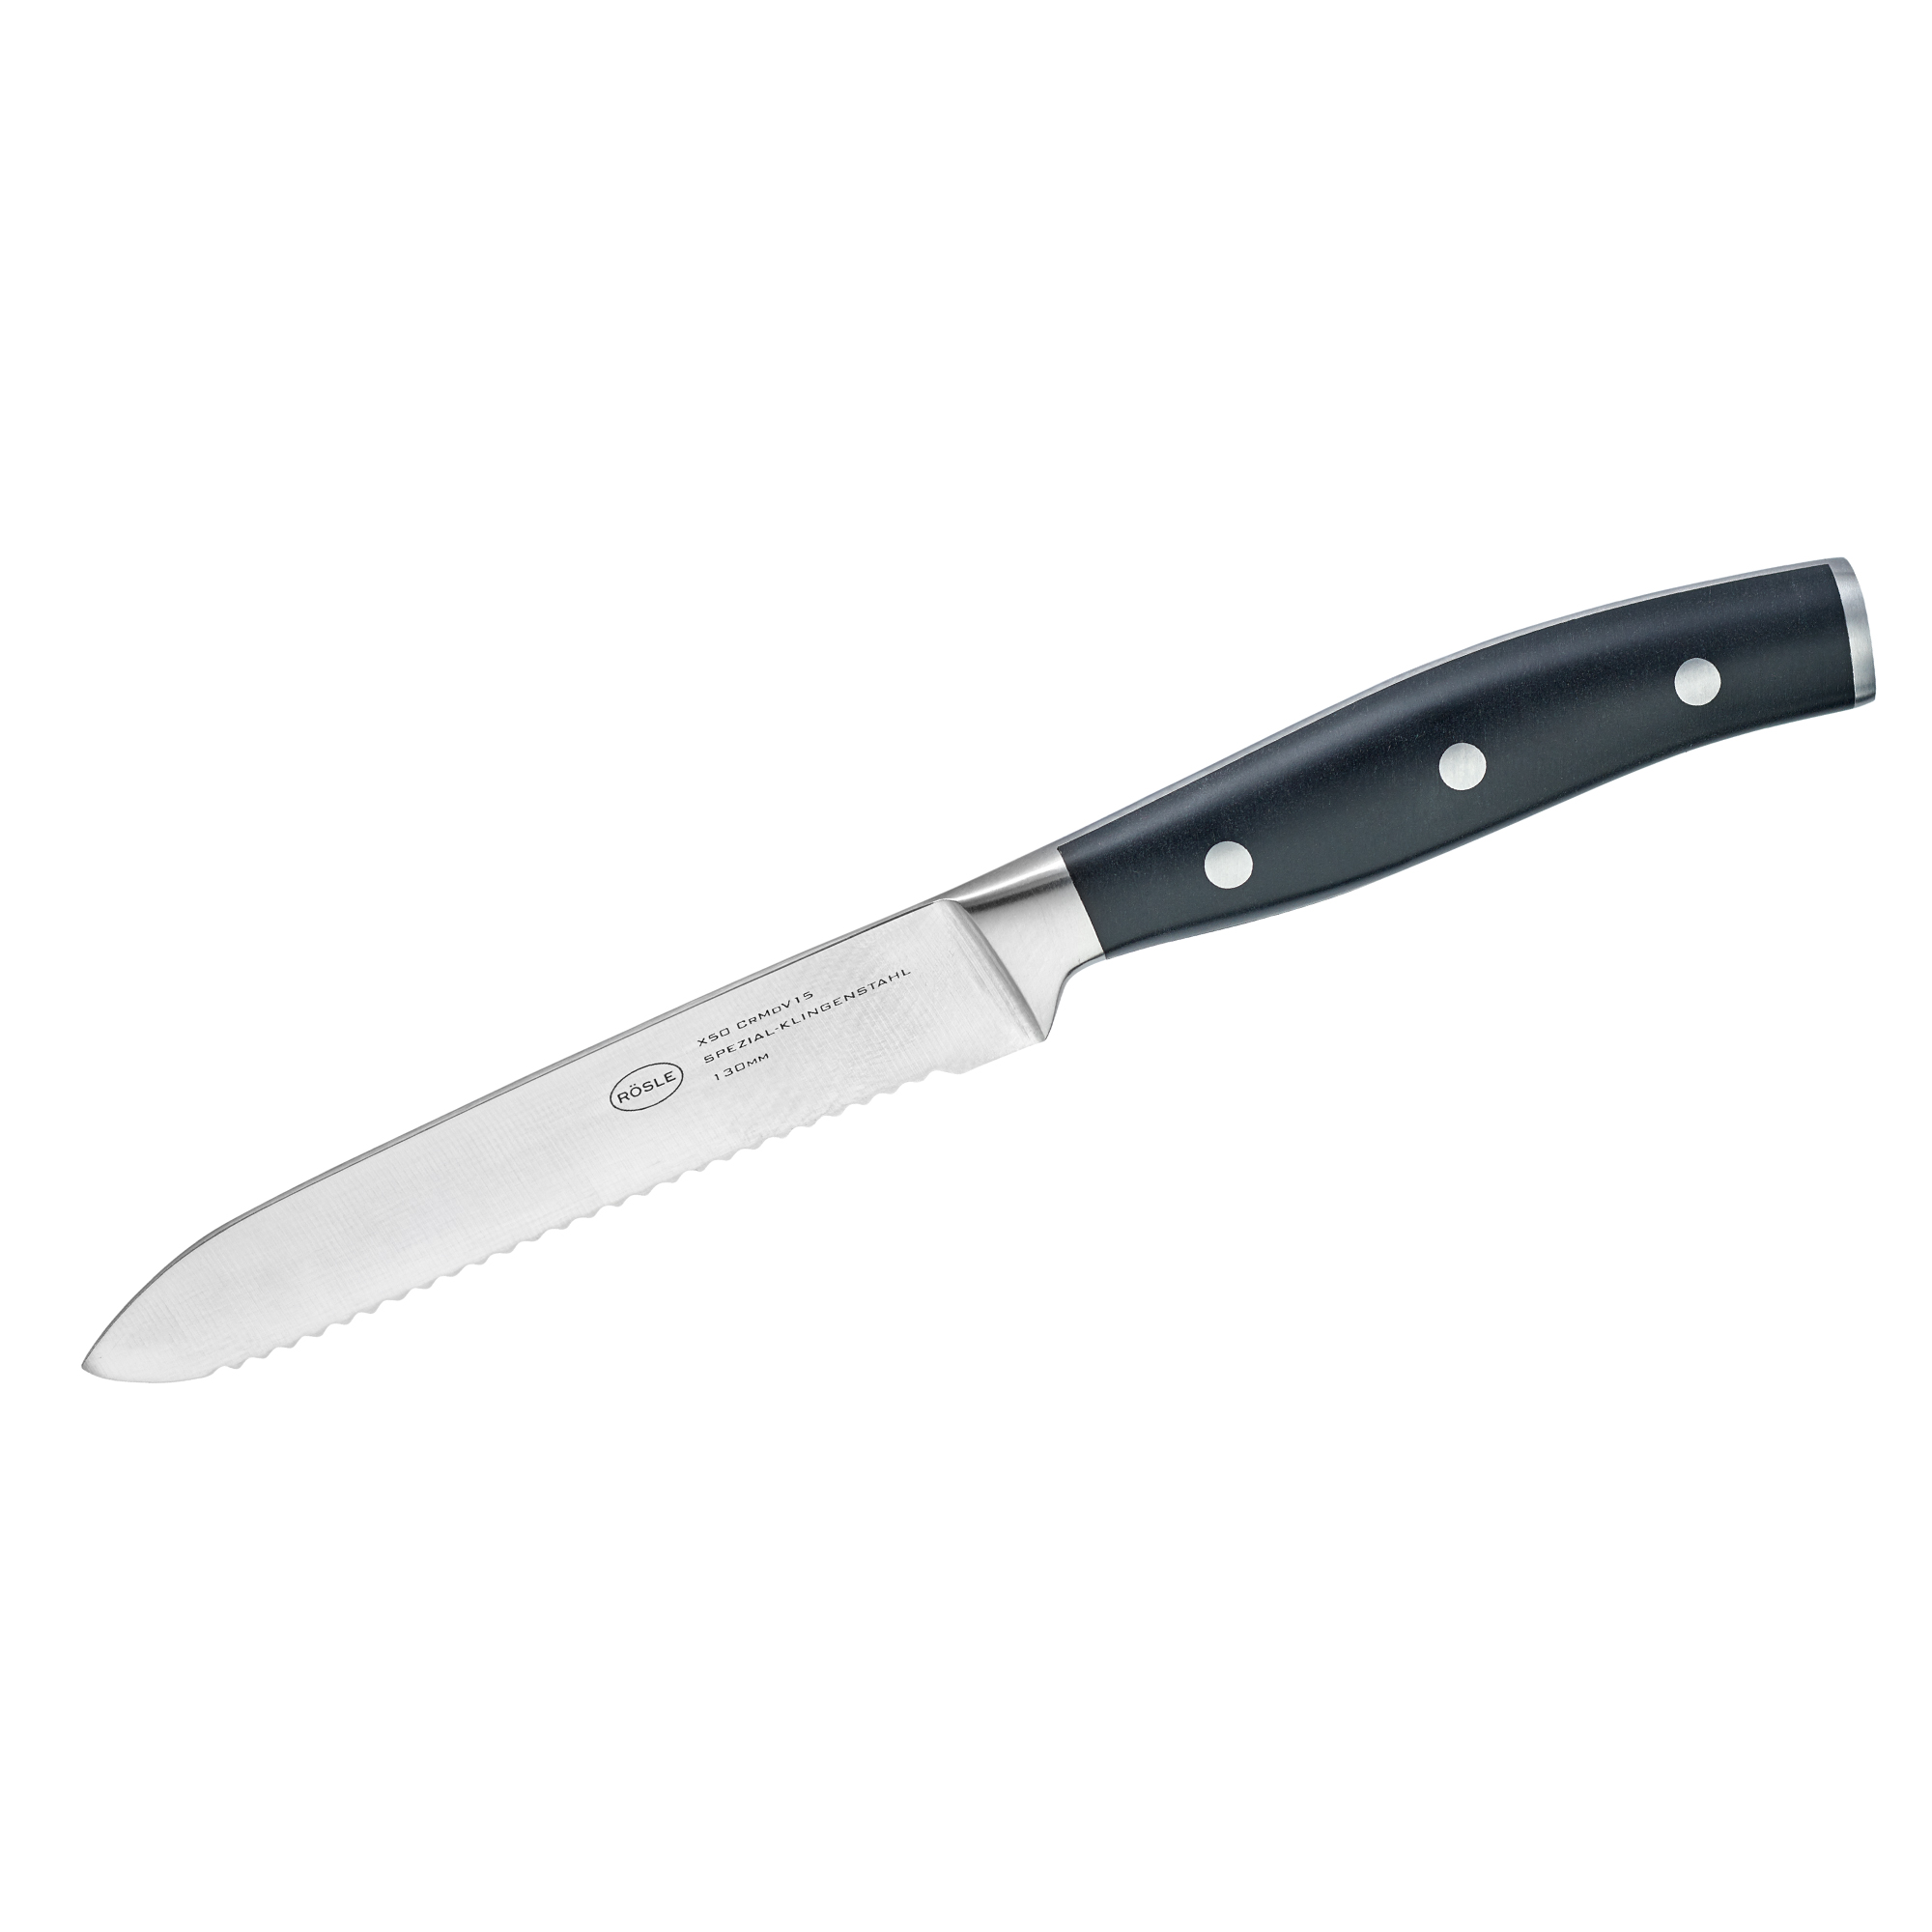 Utility knife serrated Tradition 13 cm